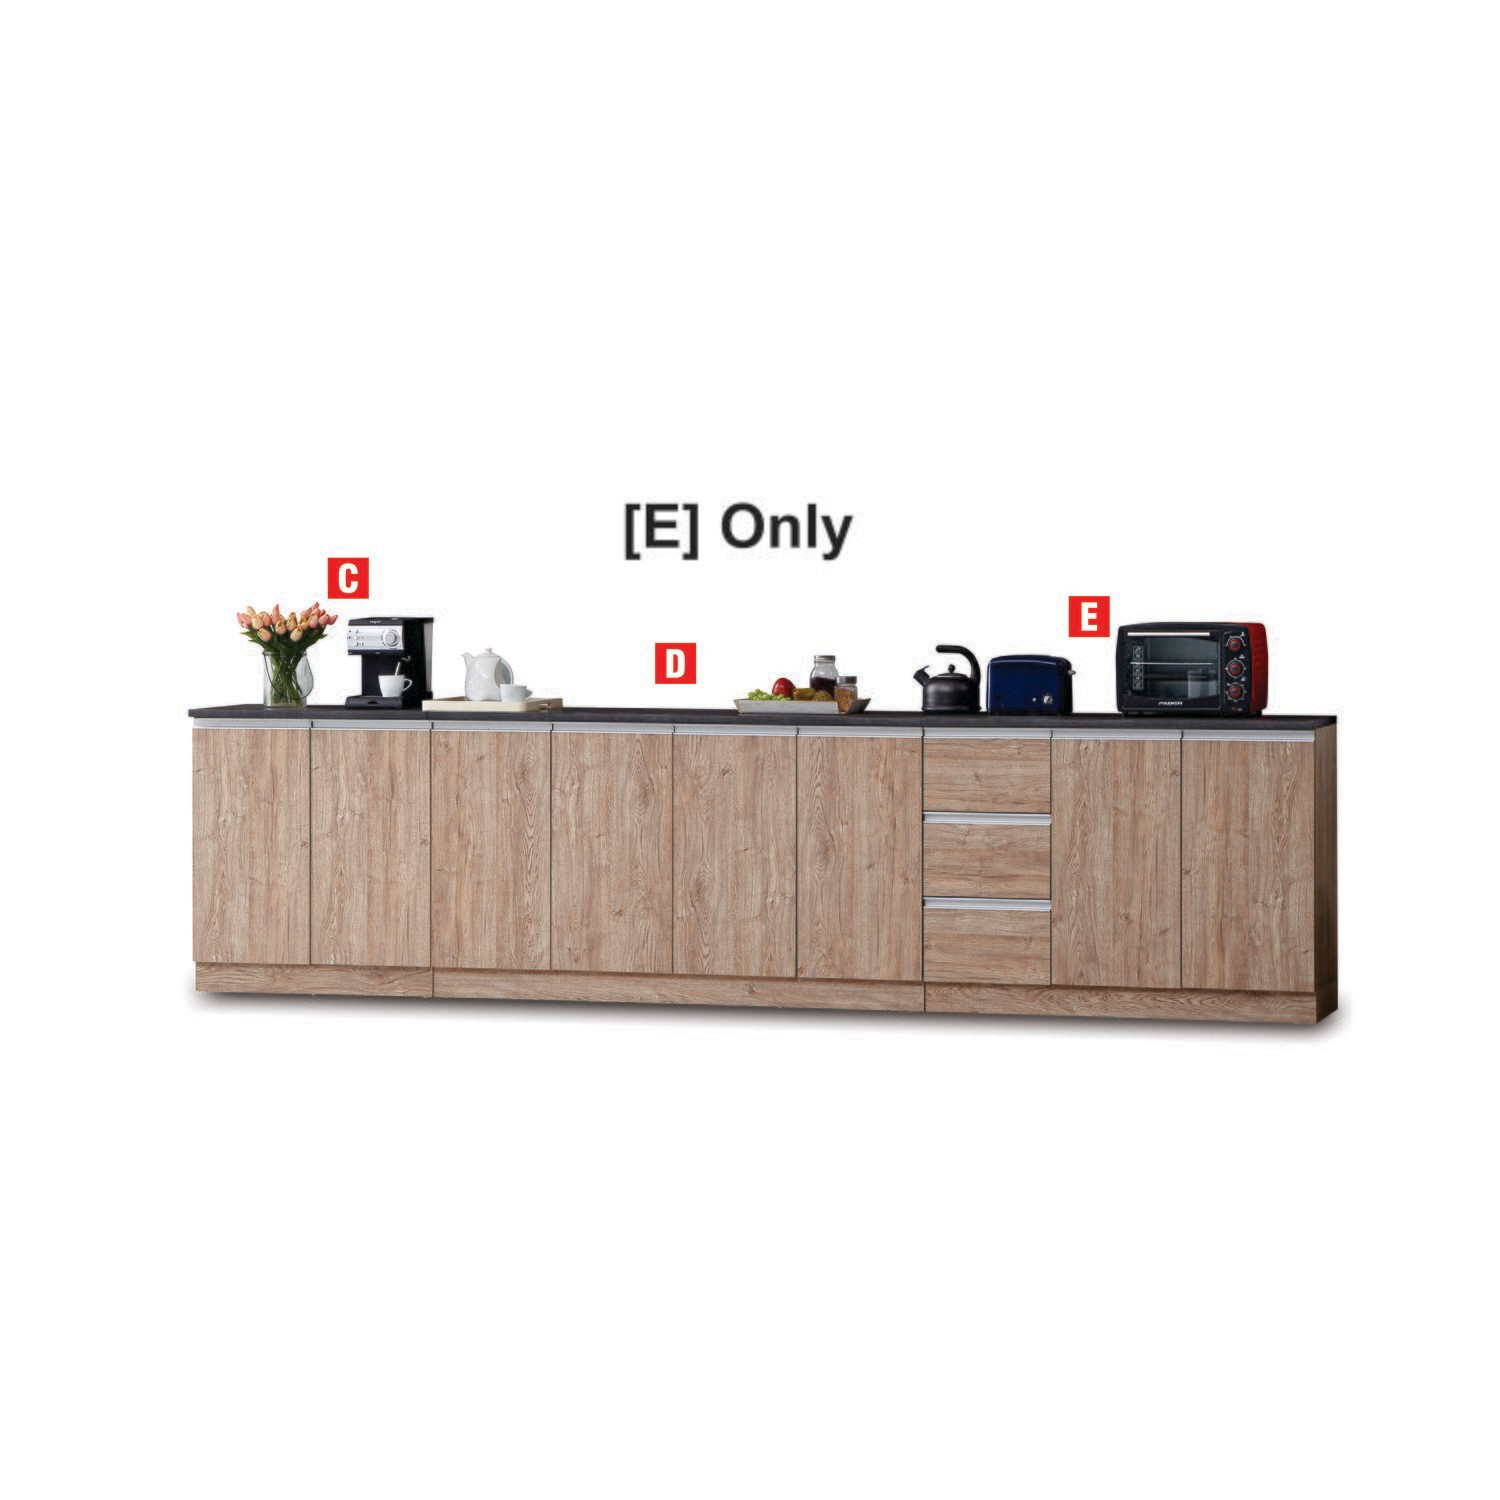 Build-in Kitchen Cabinet (E ONLY)